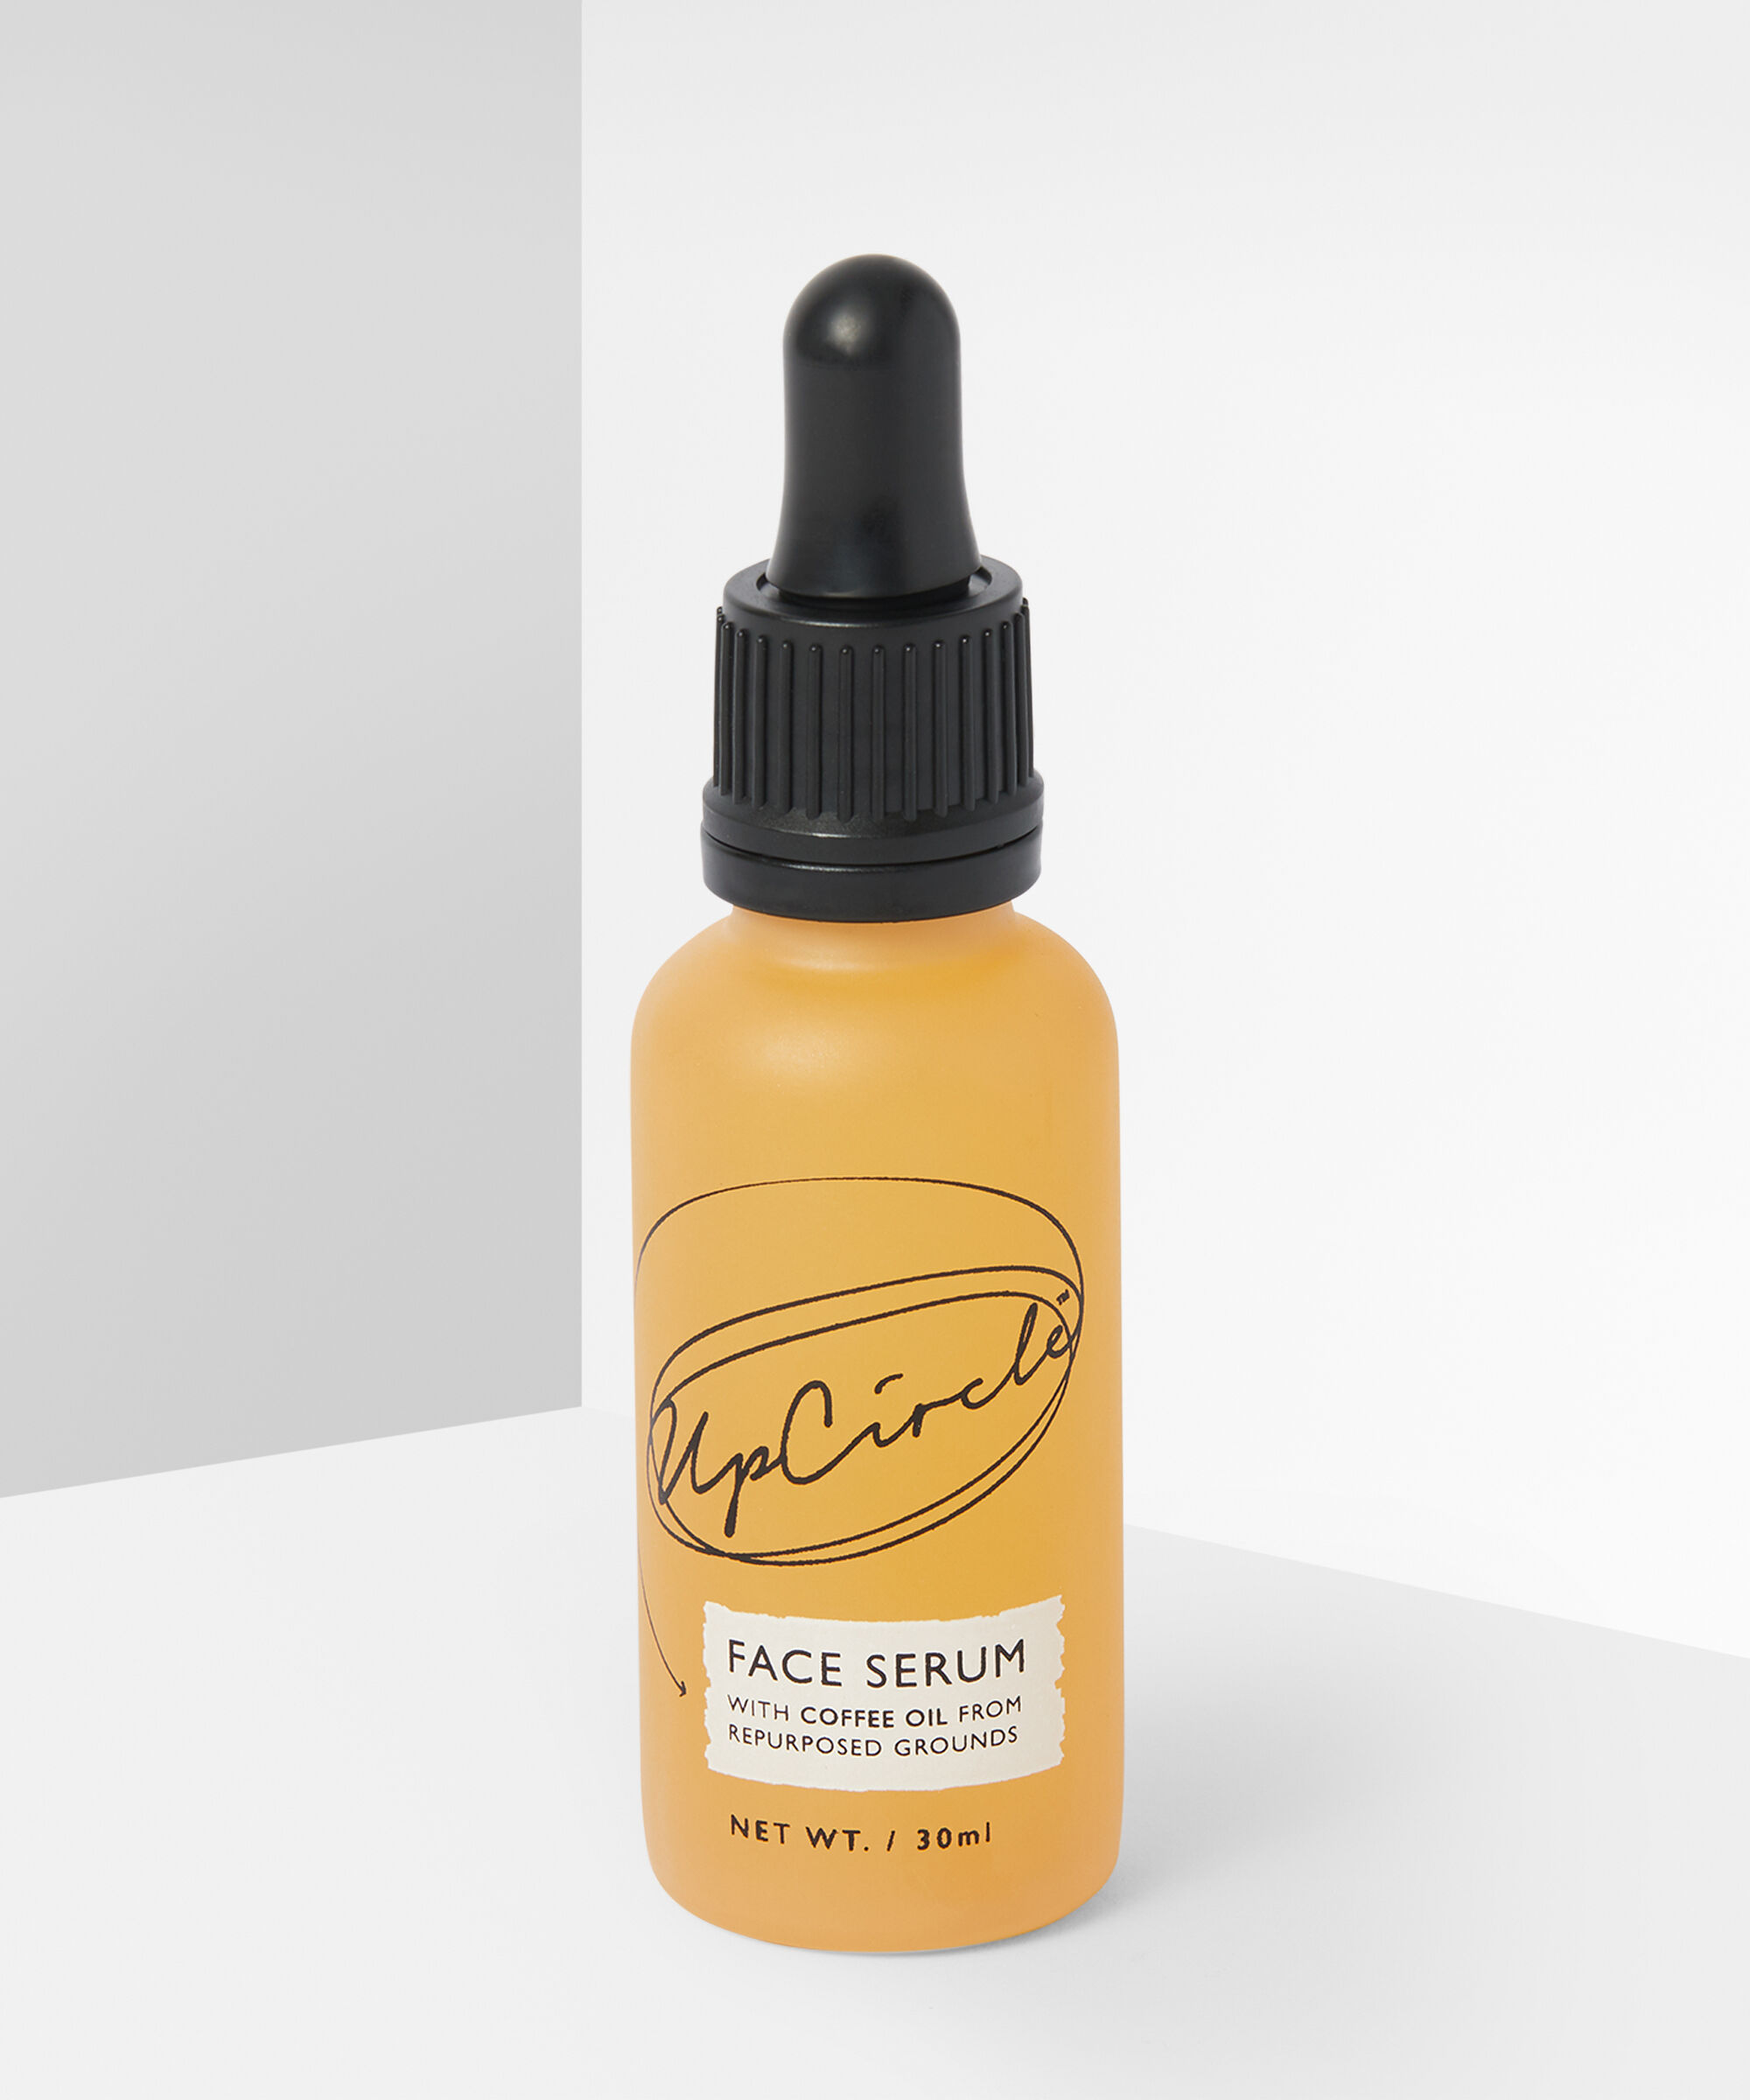 UpCircle Beauty - Organic Facial Serum with Coffee Oil